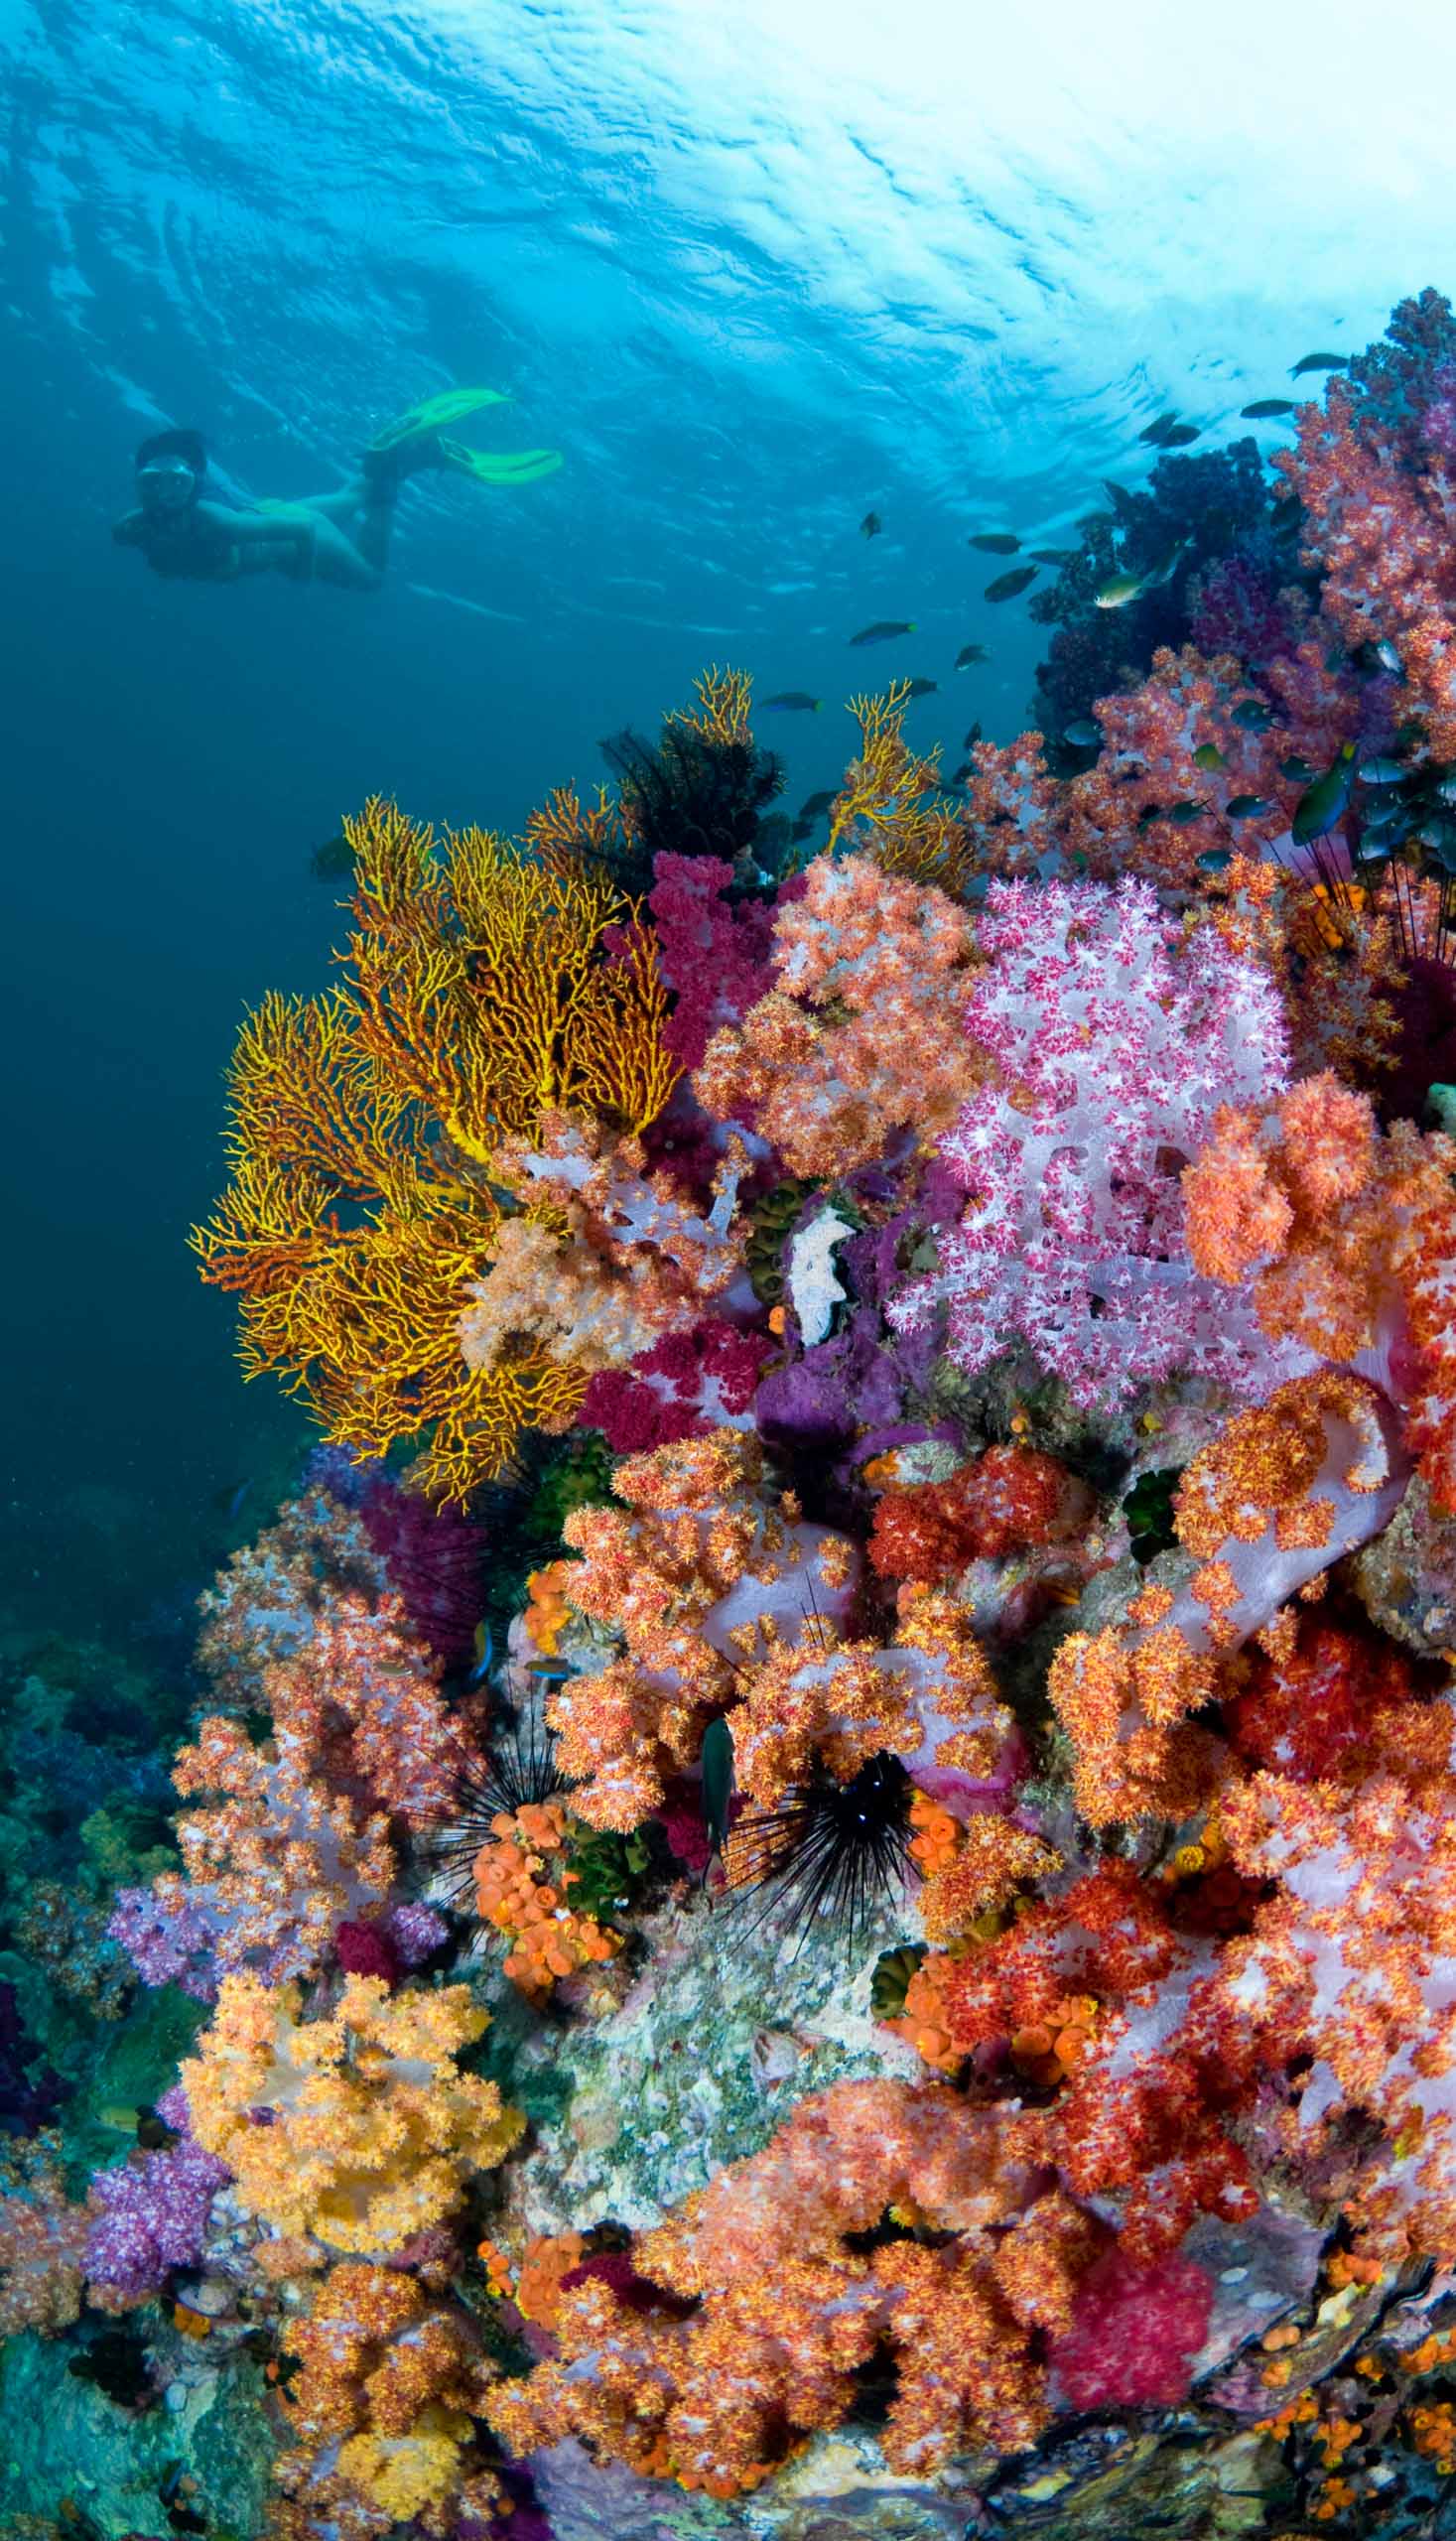 A coral reef.